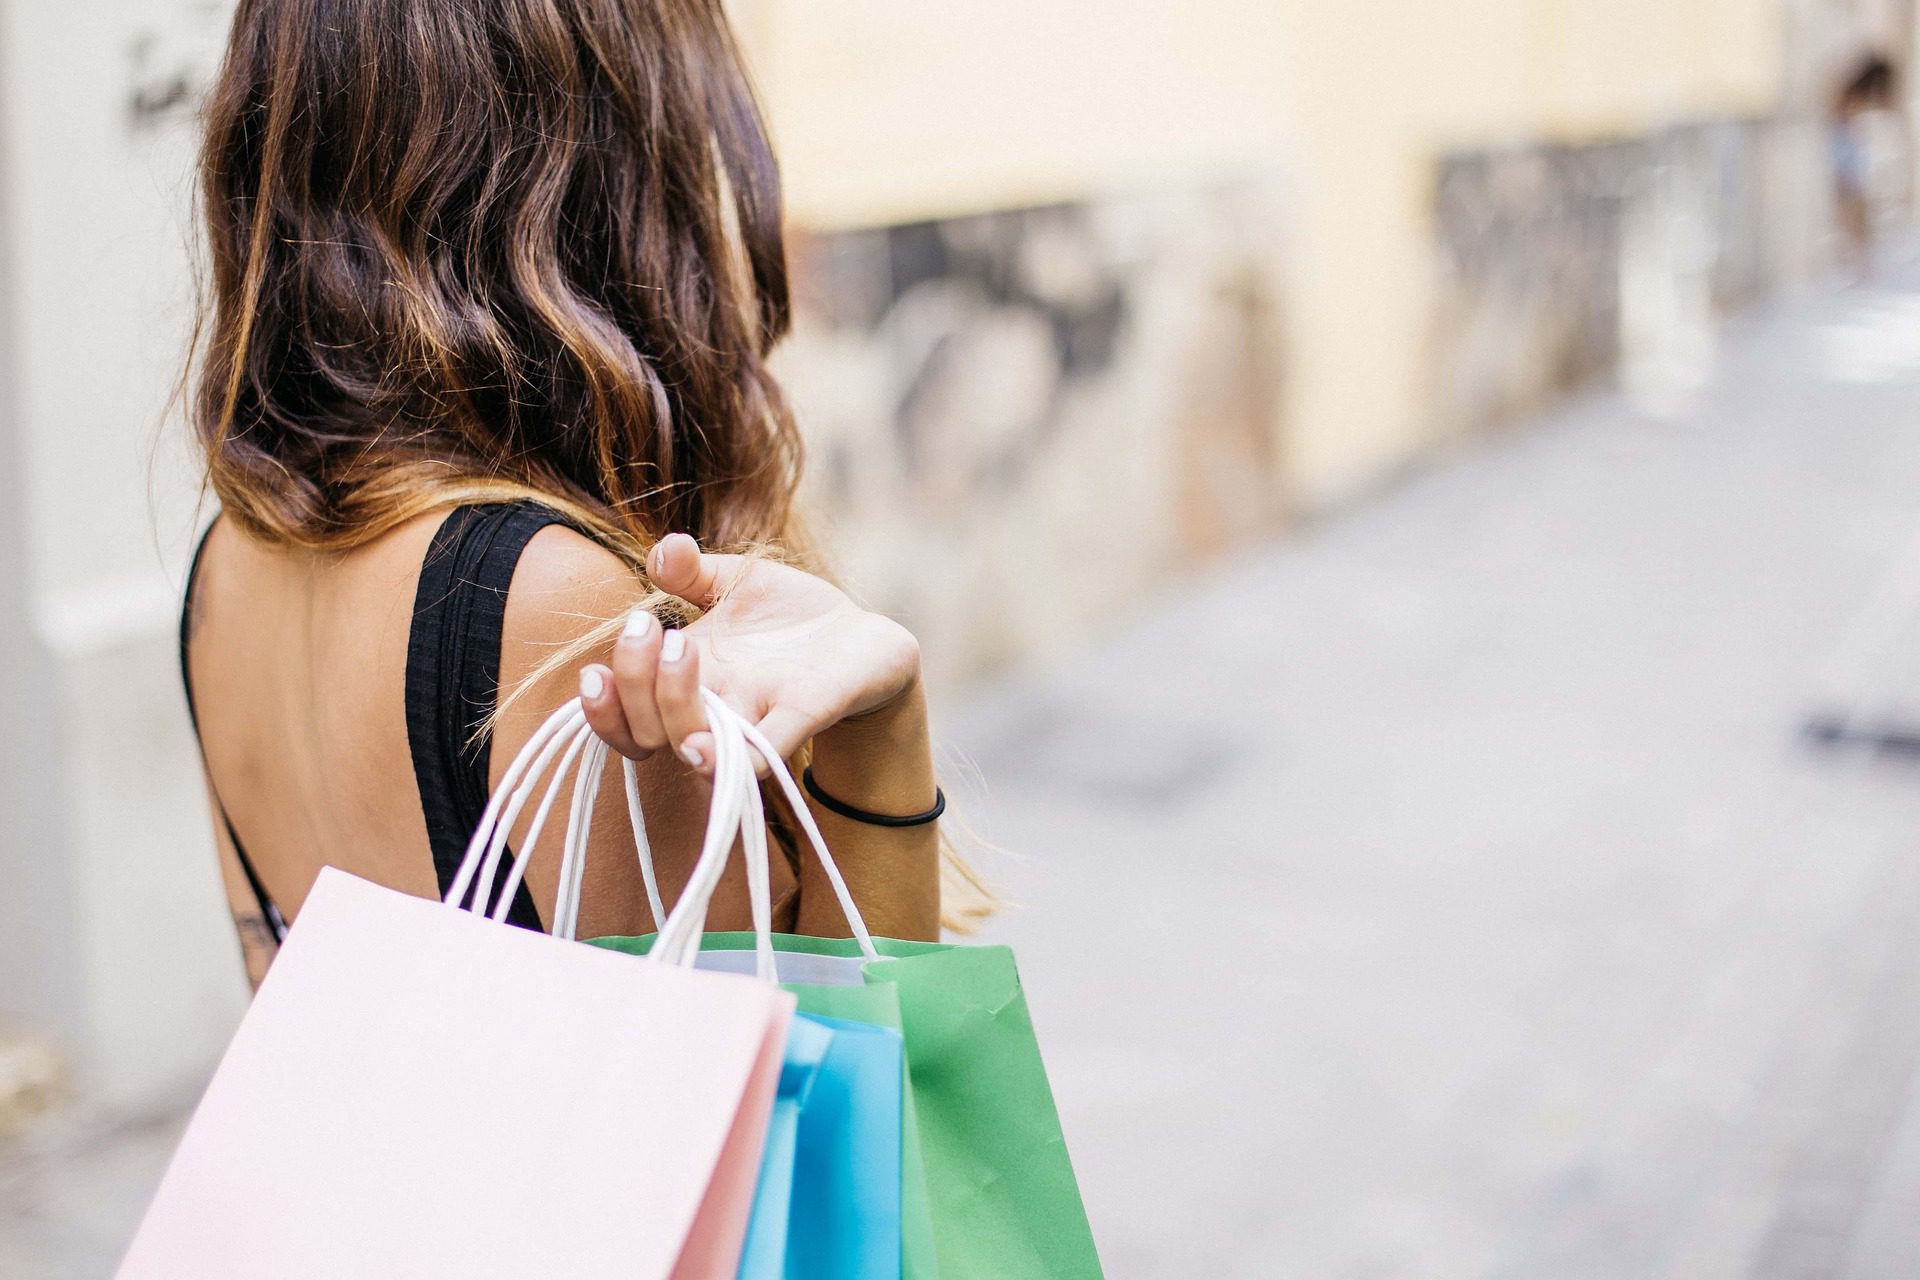 3 Ways That Retailers Can Win During the 2019 Holiday Shopping Season